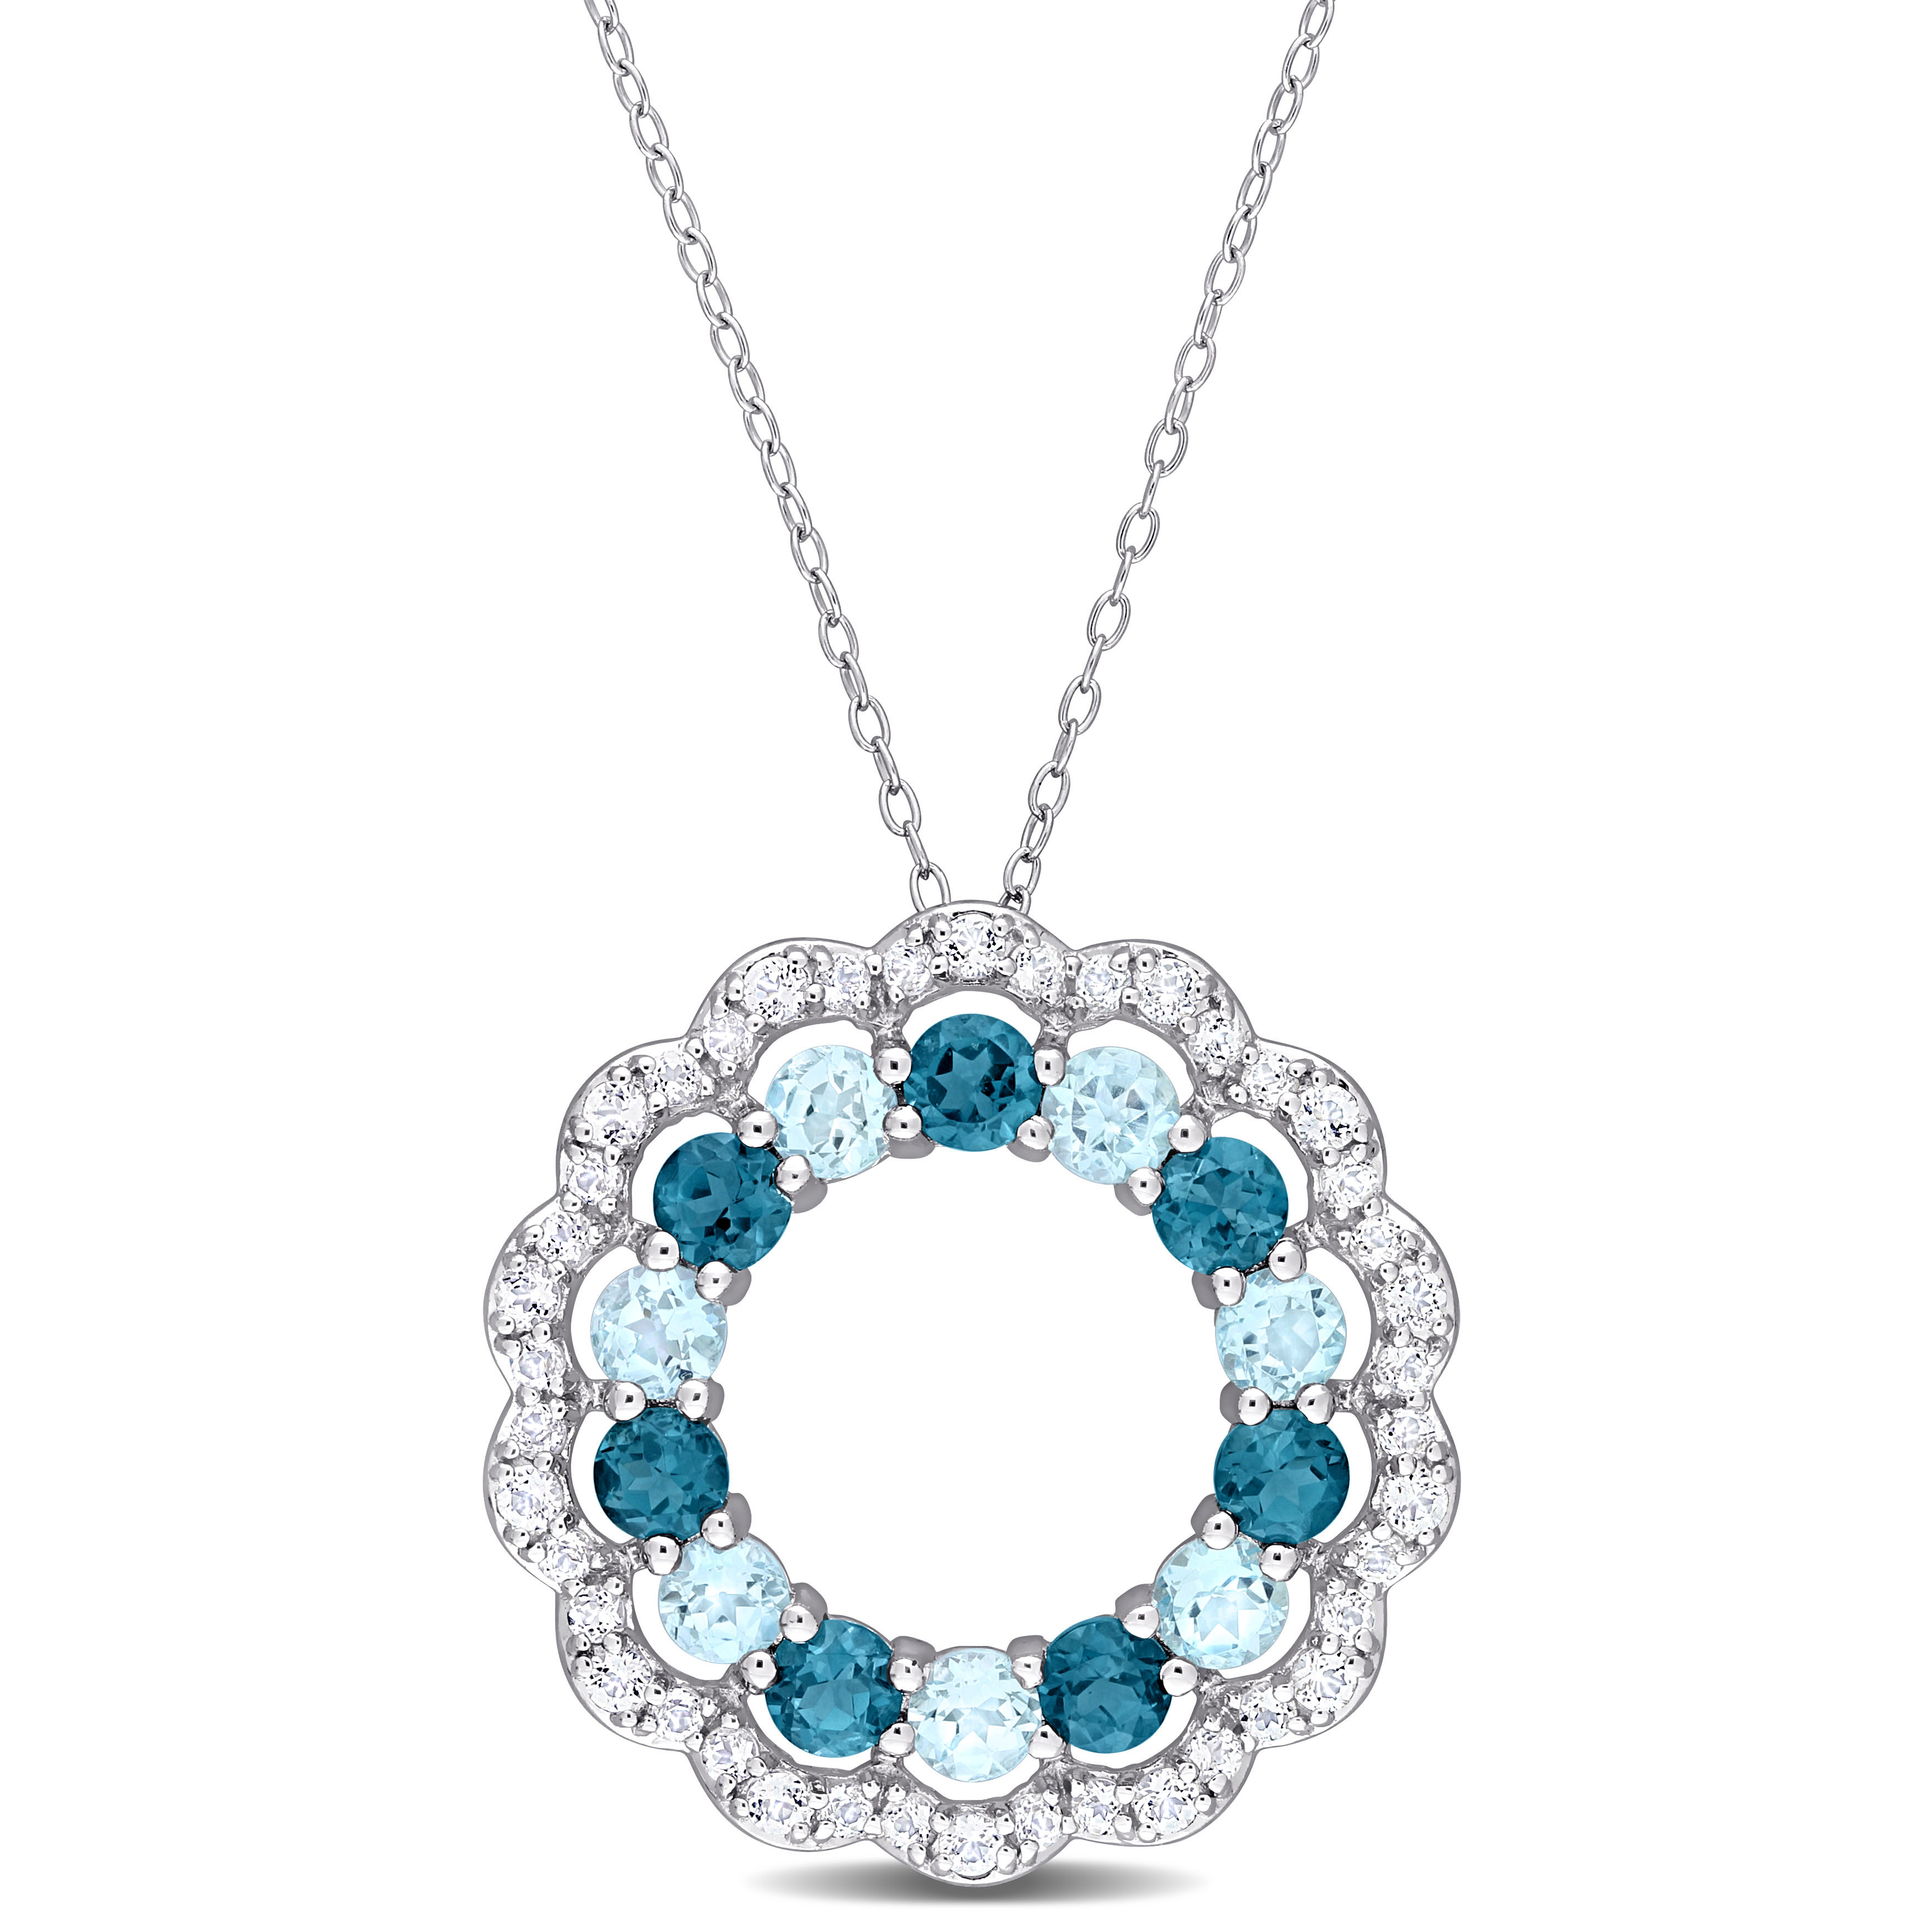 6 CT TGW London Blue, Sky Blue and White Topaz Open Circle Pendant with Chain in Sterling Silver